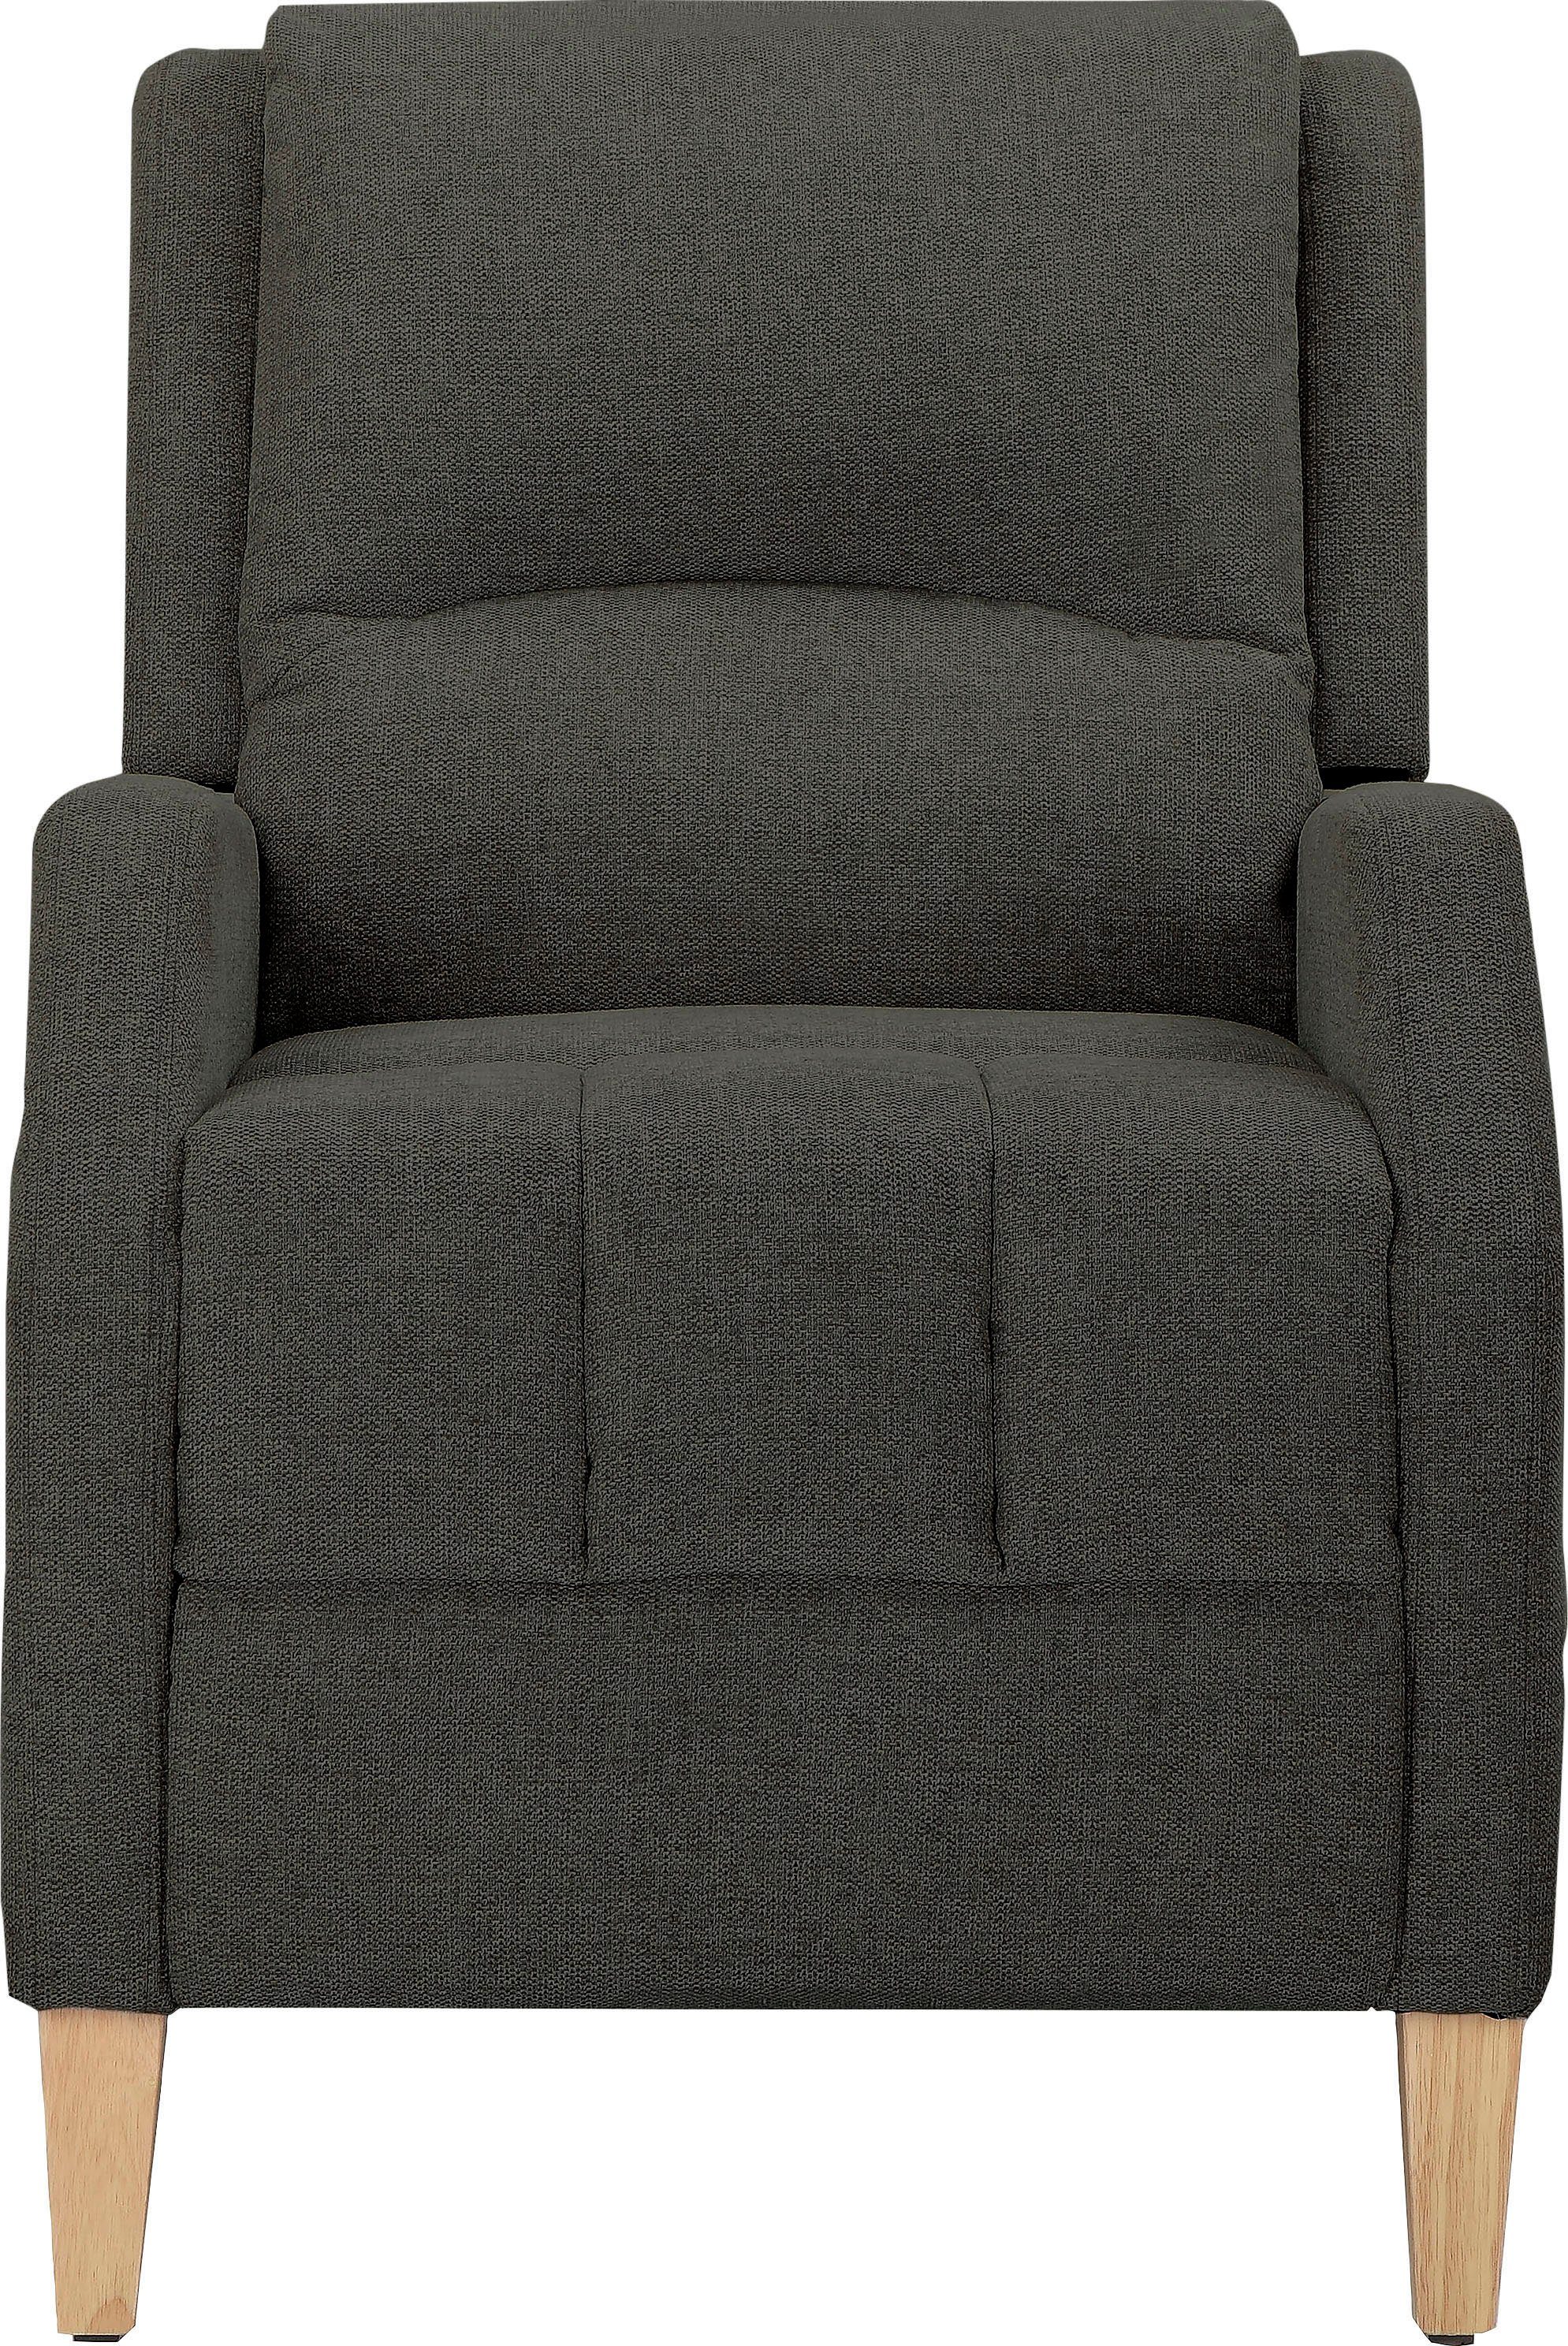 Home affaire Relaxfauteuil Tholey (1 stuk)